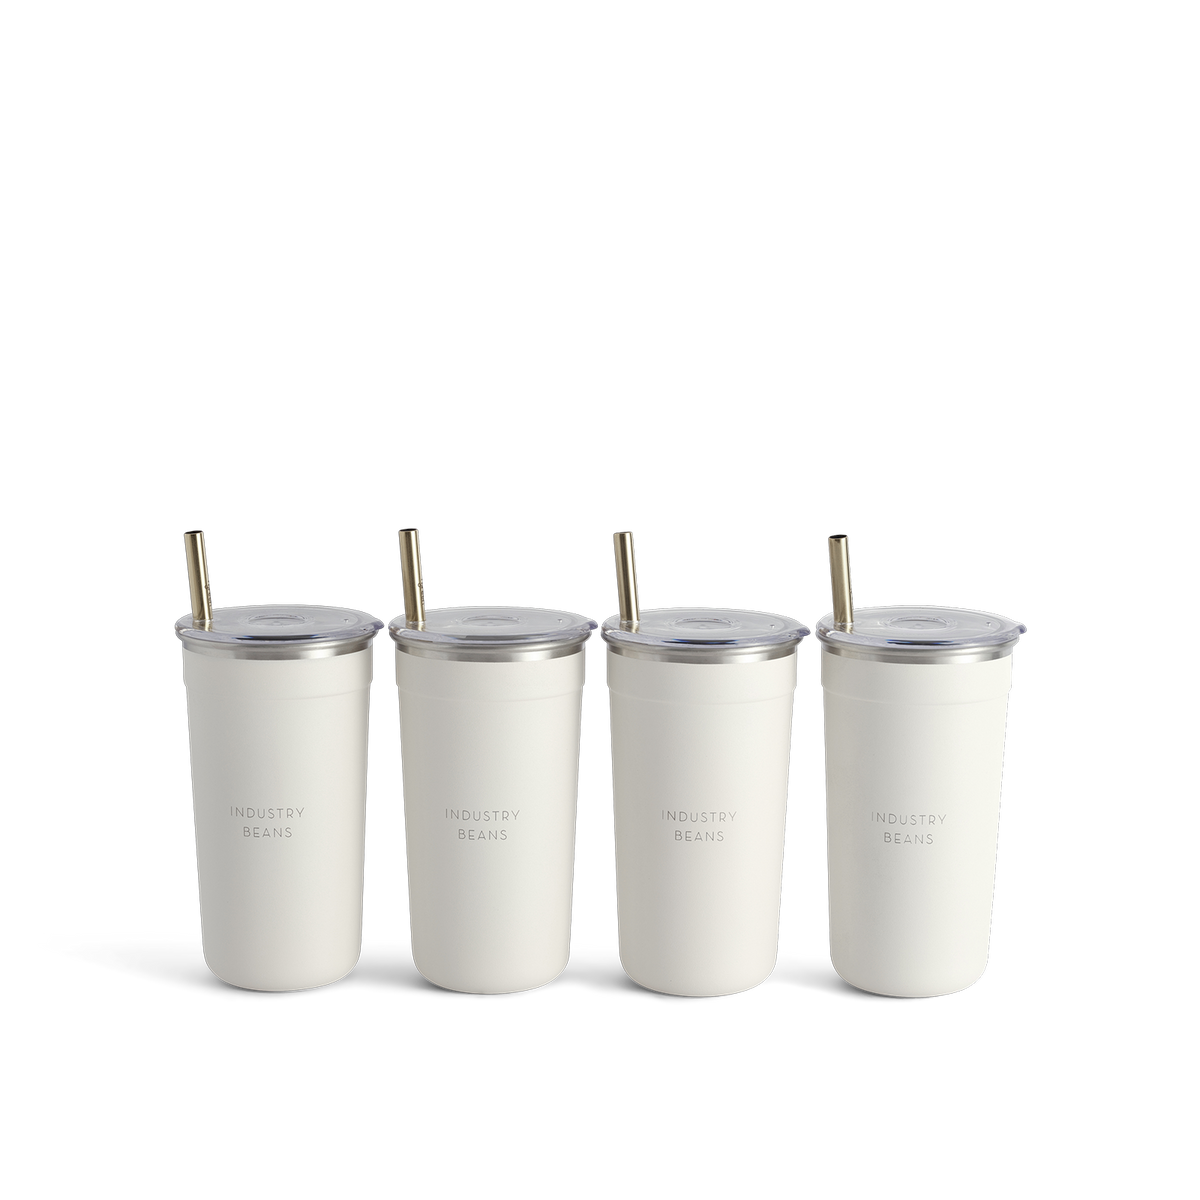 frank green 16 oz Stainless Steel Party Cup Set of 4